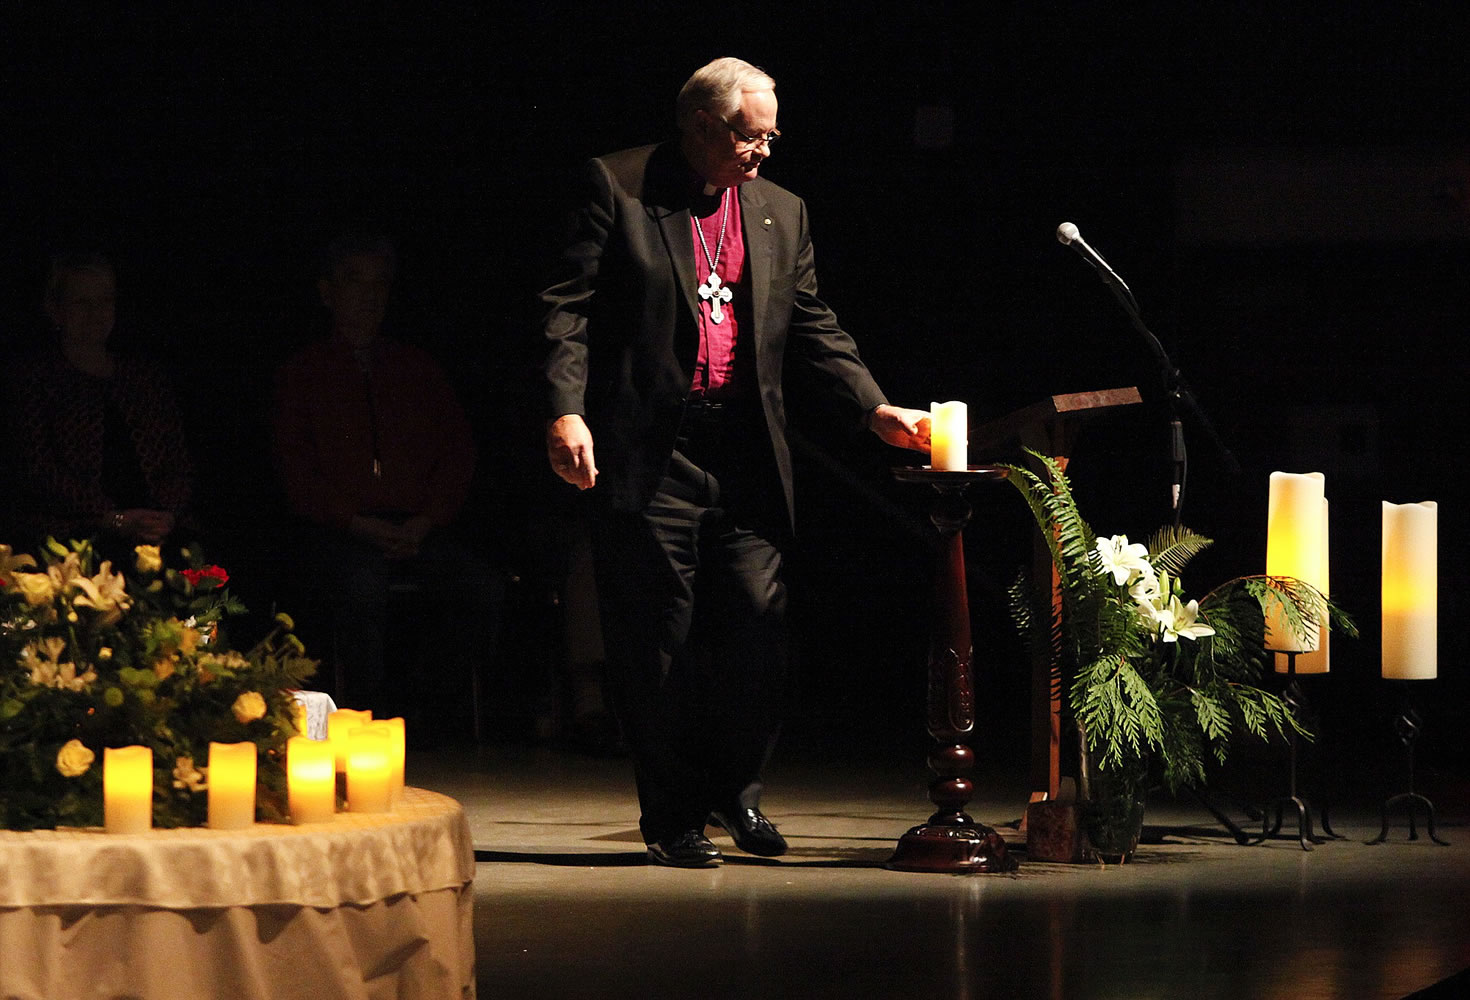 Bishop Kirby Unti, representing The Church Council of Greater Seattle, holds a candle during an interfaith candlelight prayer service to honor the four-month anniversary of the Marysville-Pilchuck High School shooting on Tuesday in Marysville.